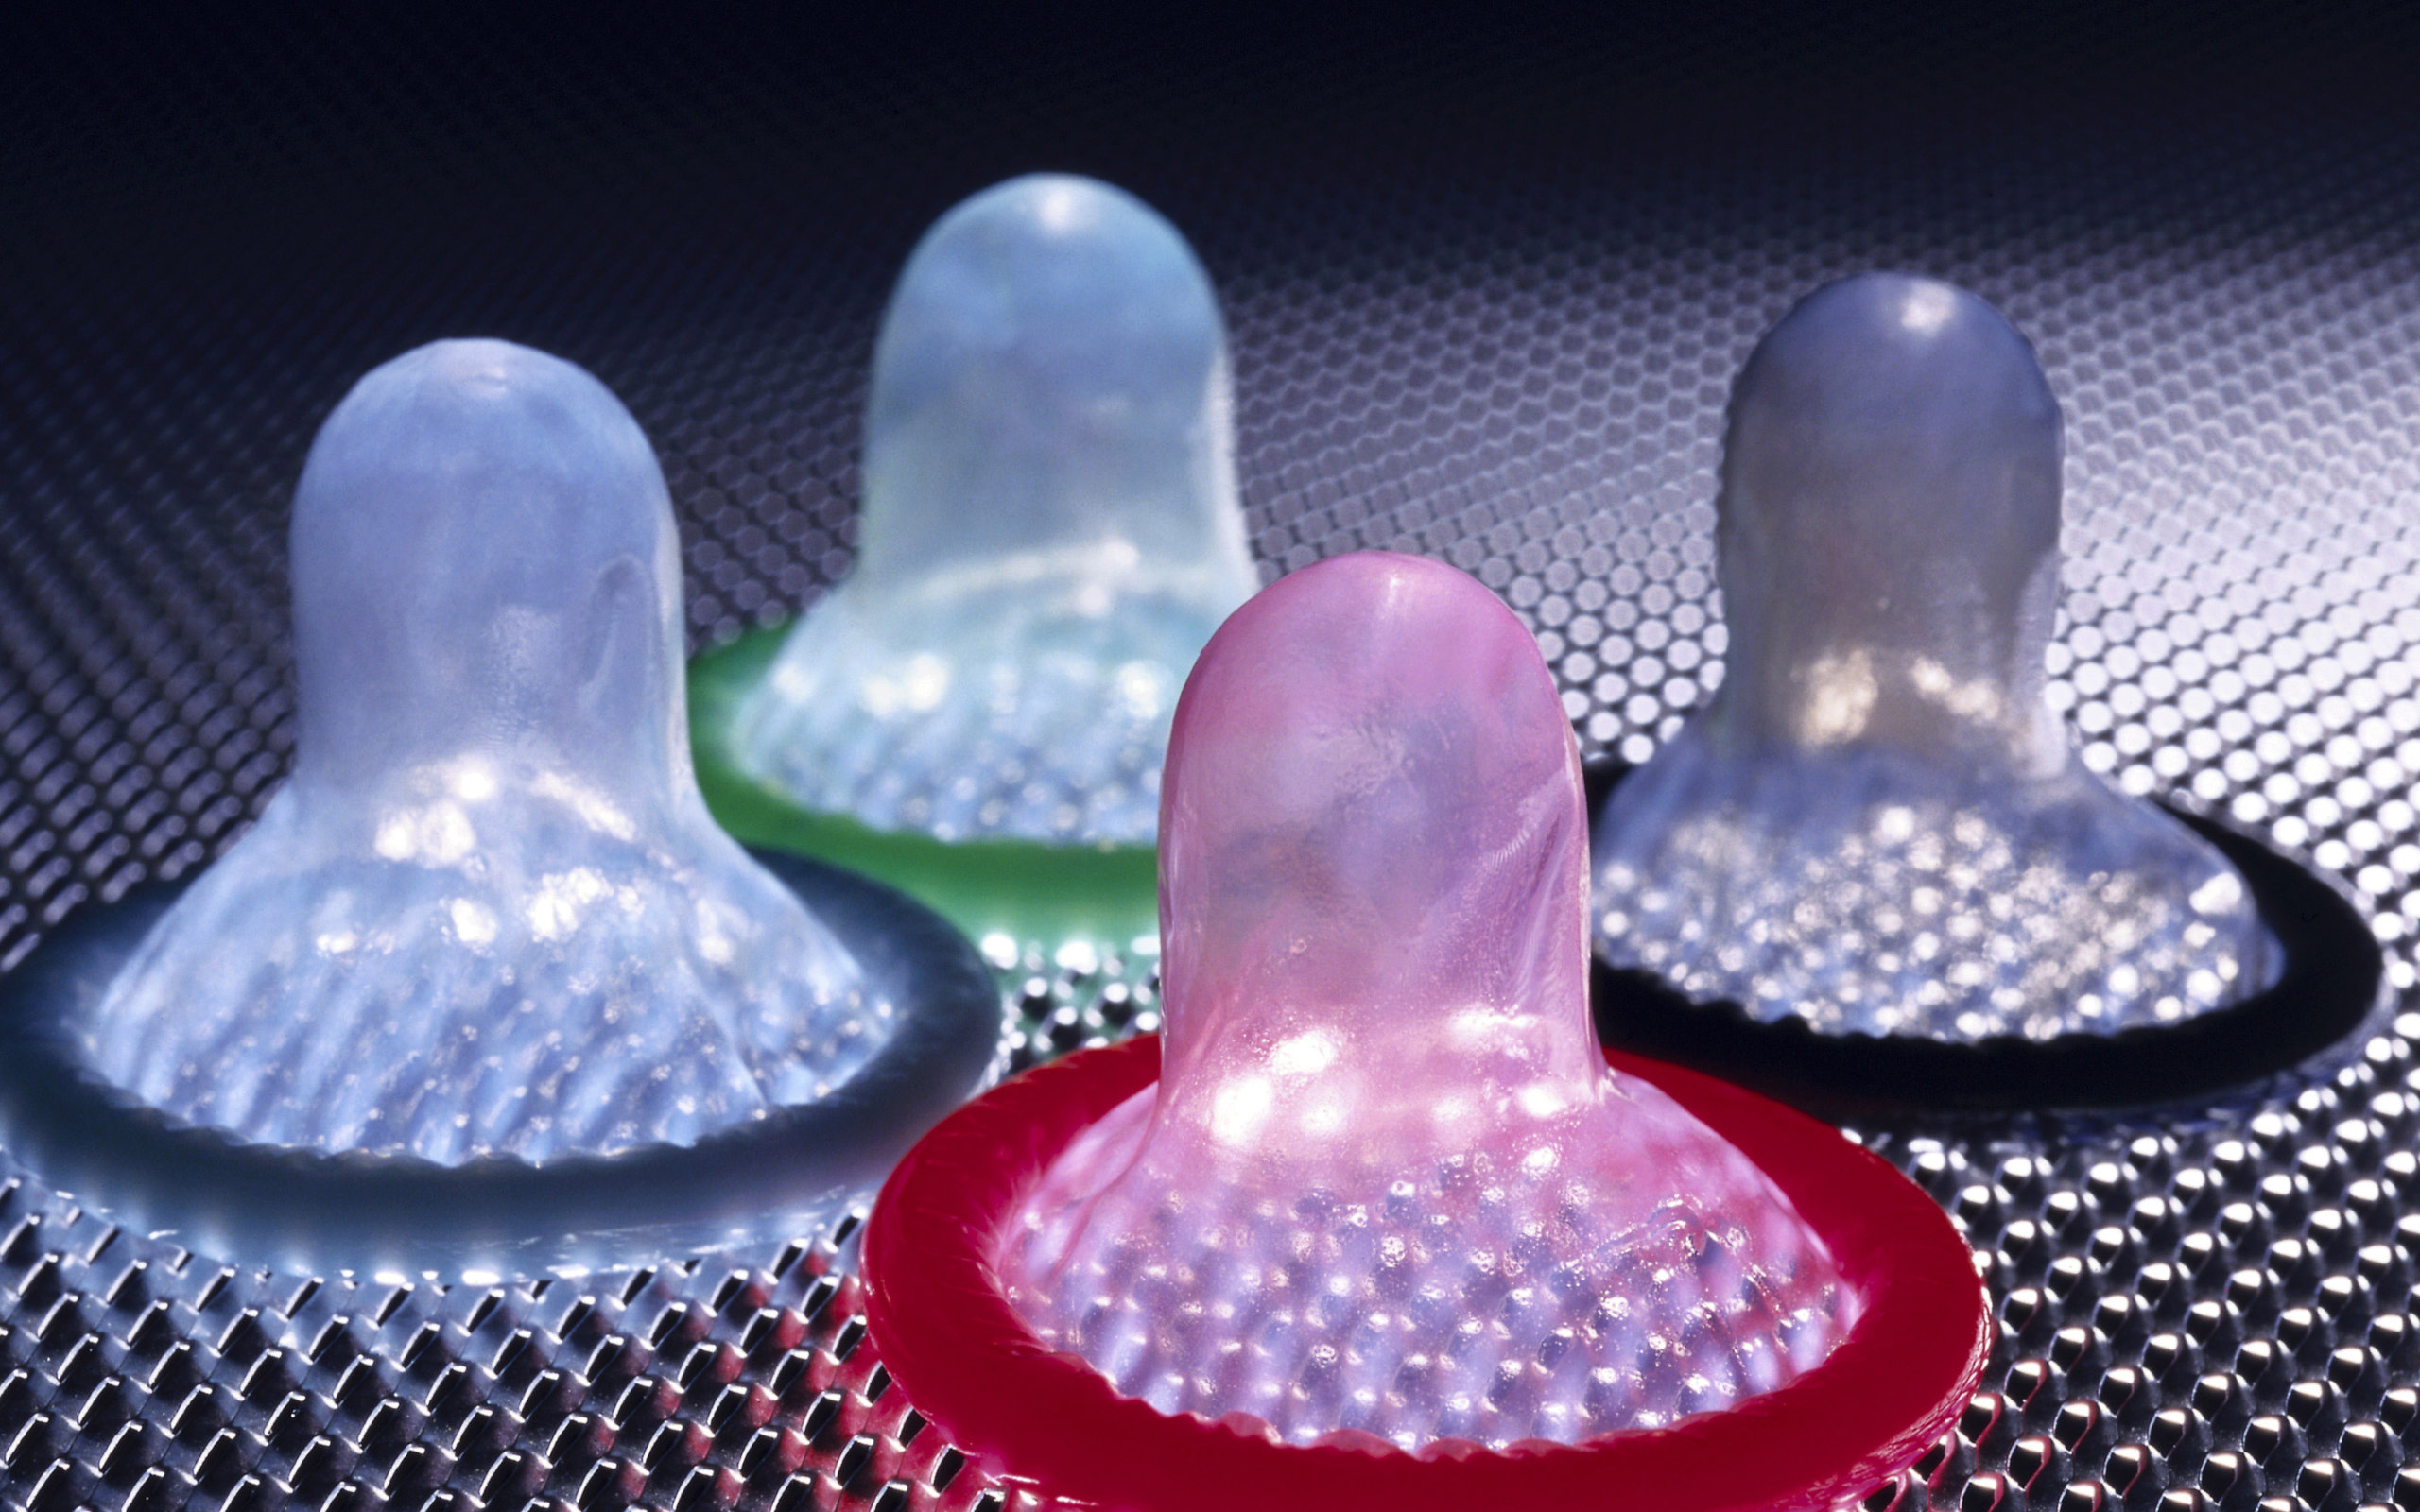 Colour condoms wallpapers and image.